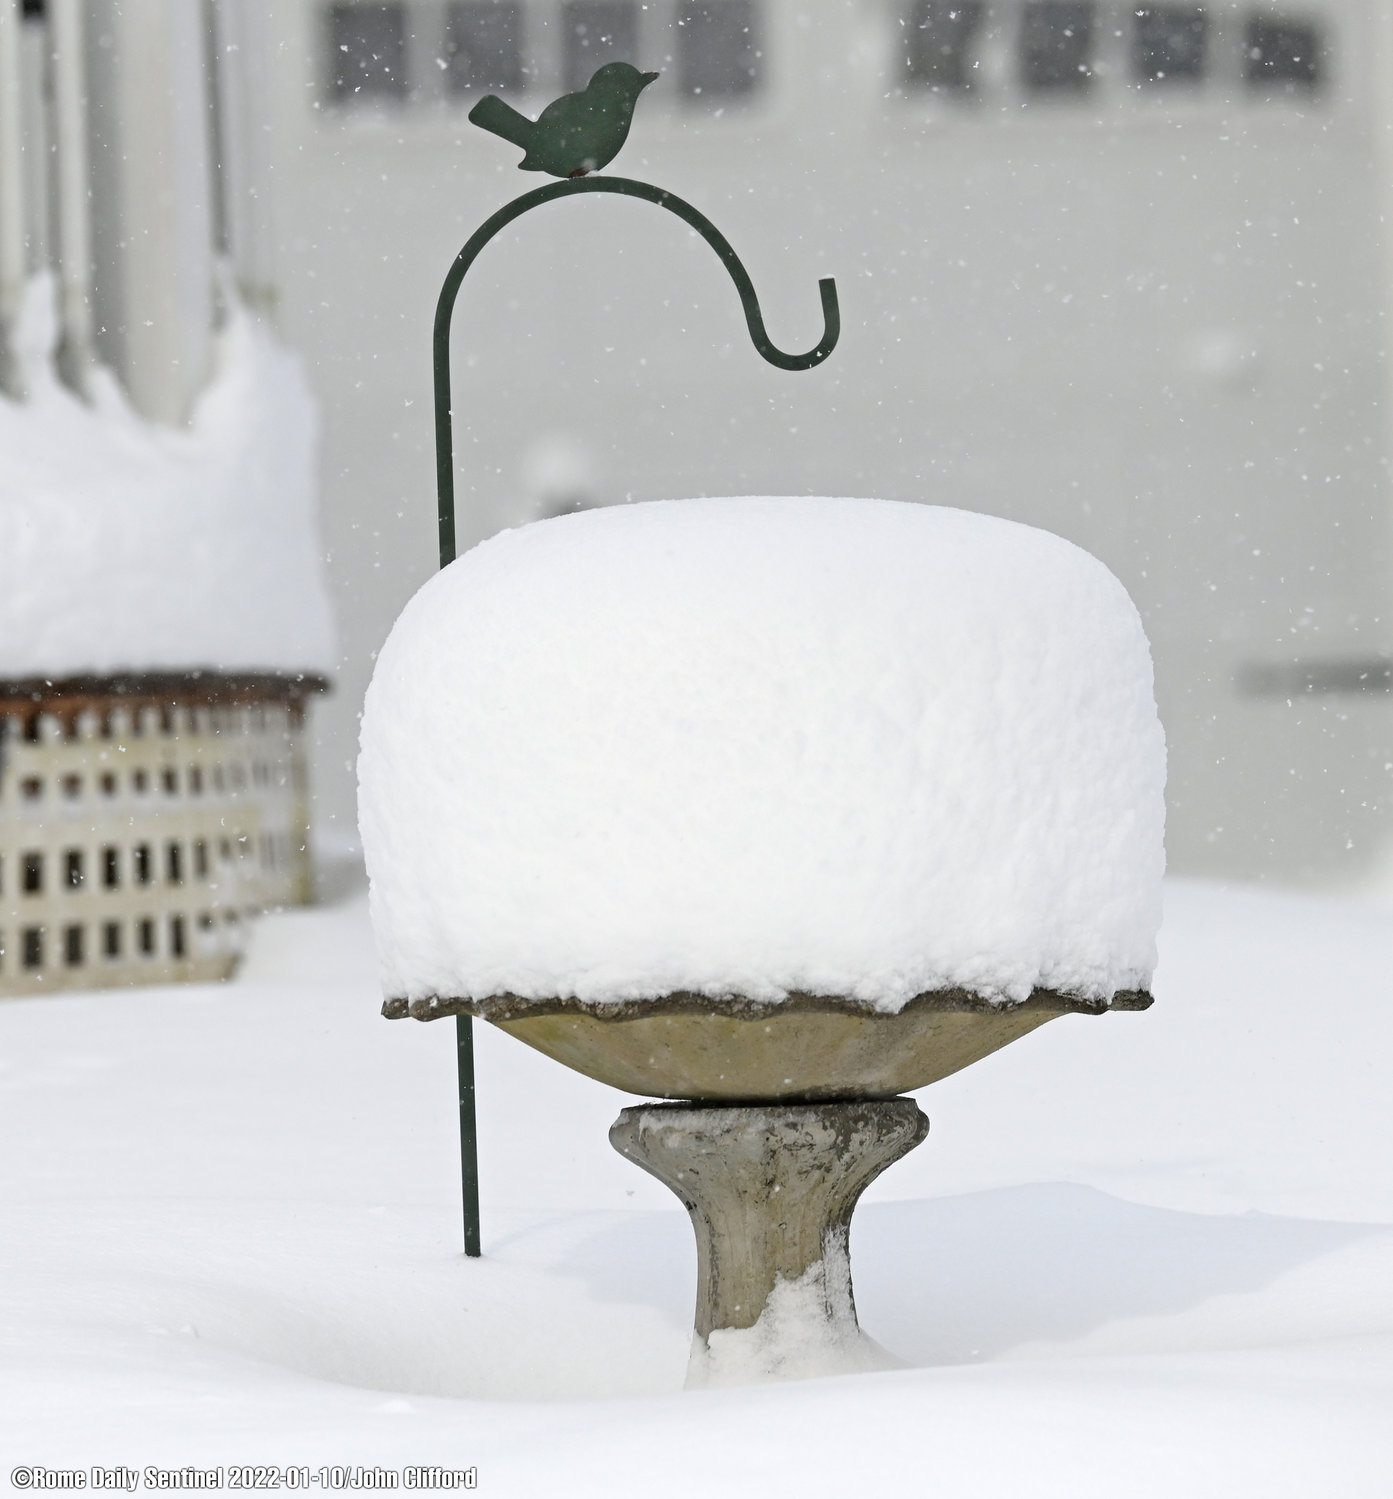 Early Monday, a bird bath in Westernville displayed the 14 inches of snow that piled up overnight Sunday into Monday. Monday afternoon, weather reports called for another round of snow to go.